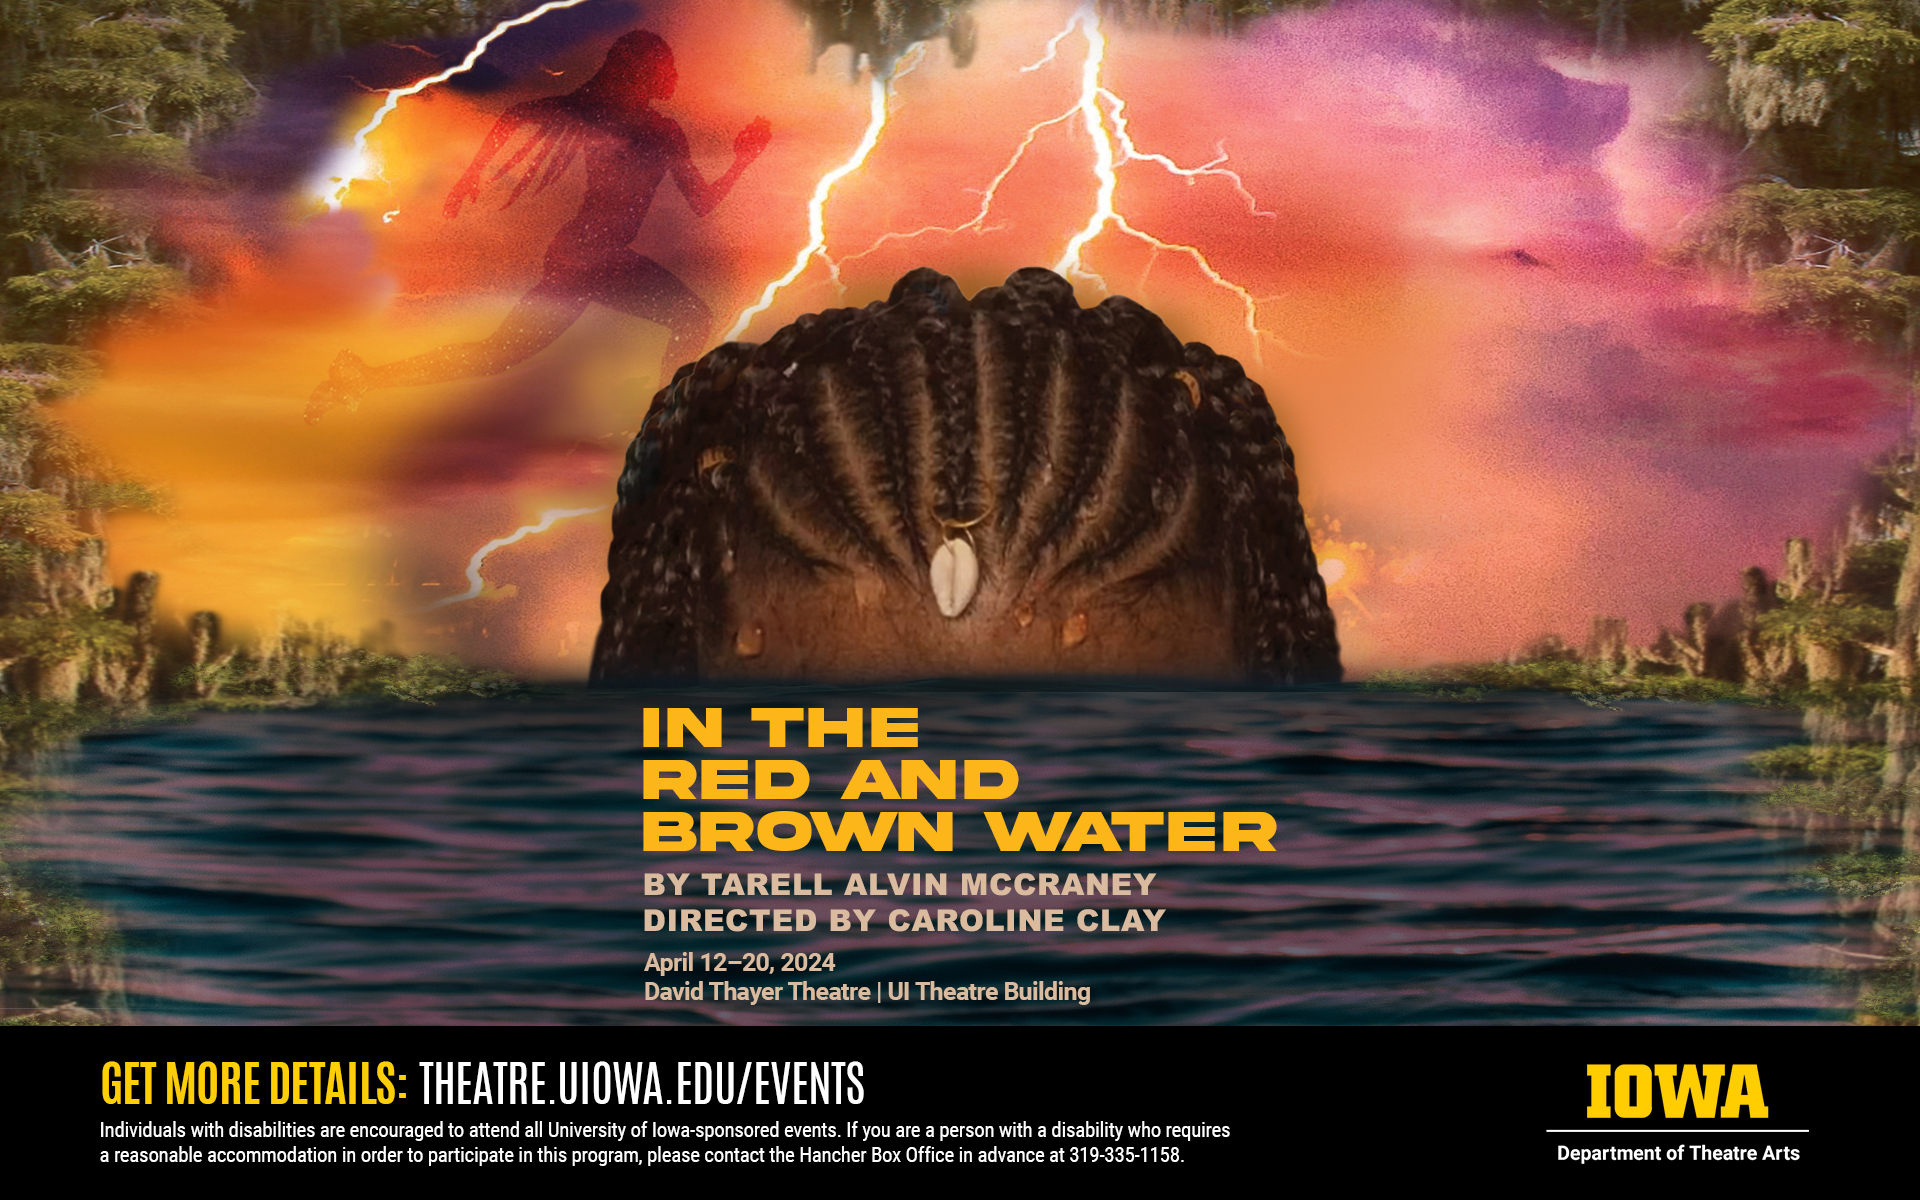 In the Red and Brown Water by Tarrell Alvin McCraney directed by Caroline Clay